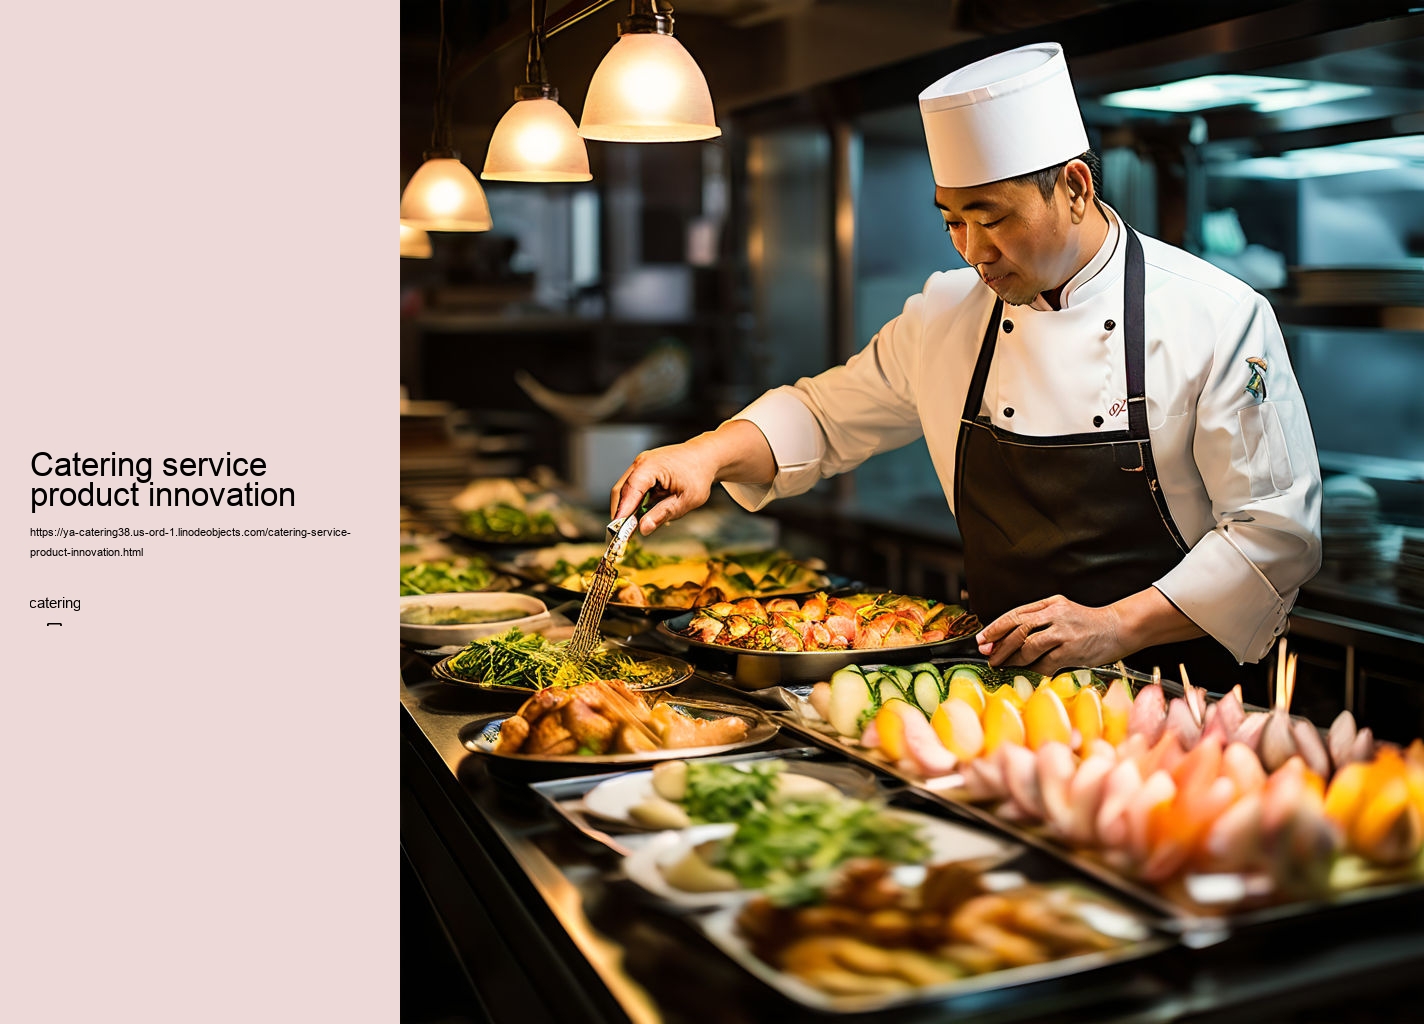 Catering service product innovation